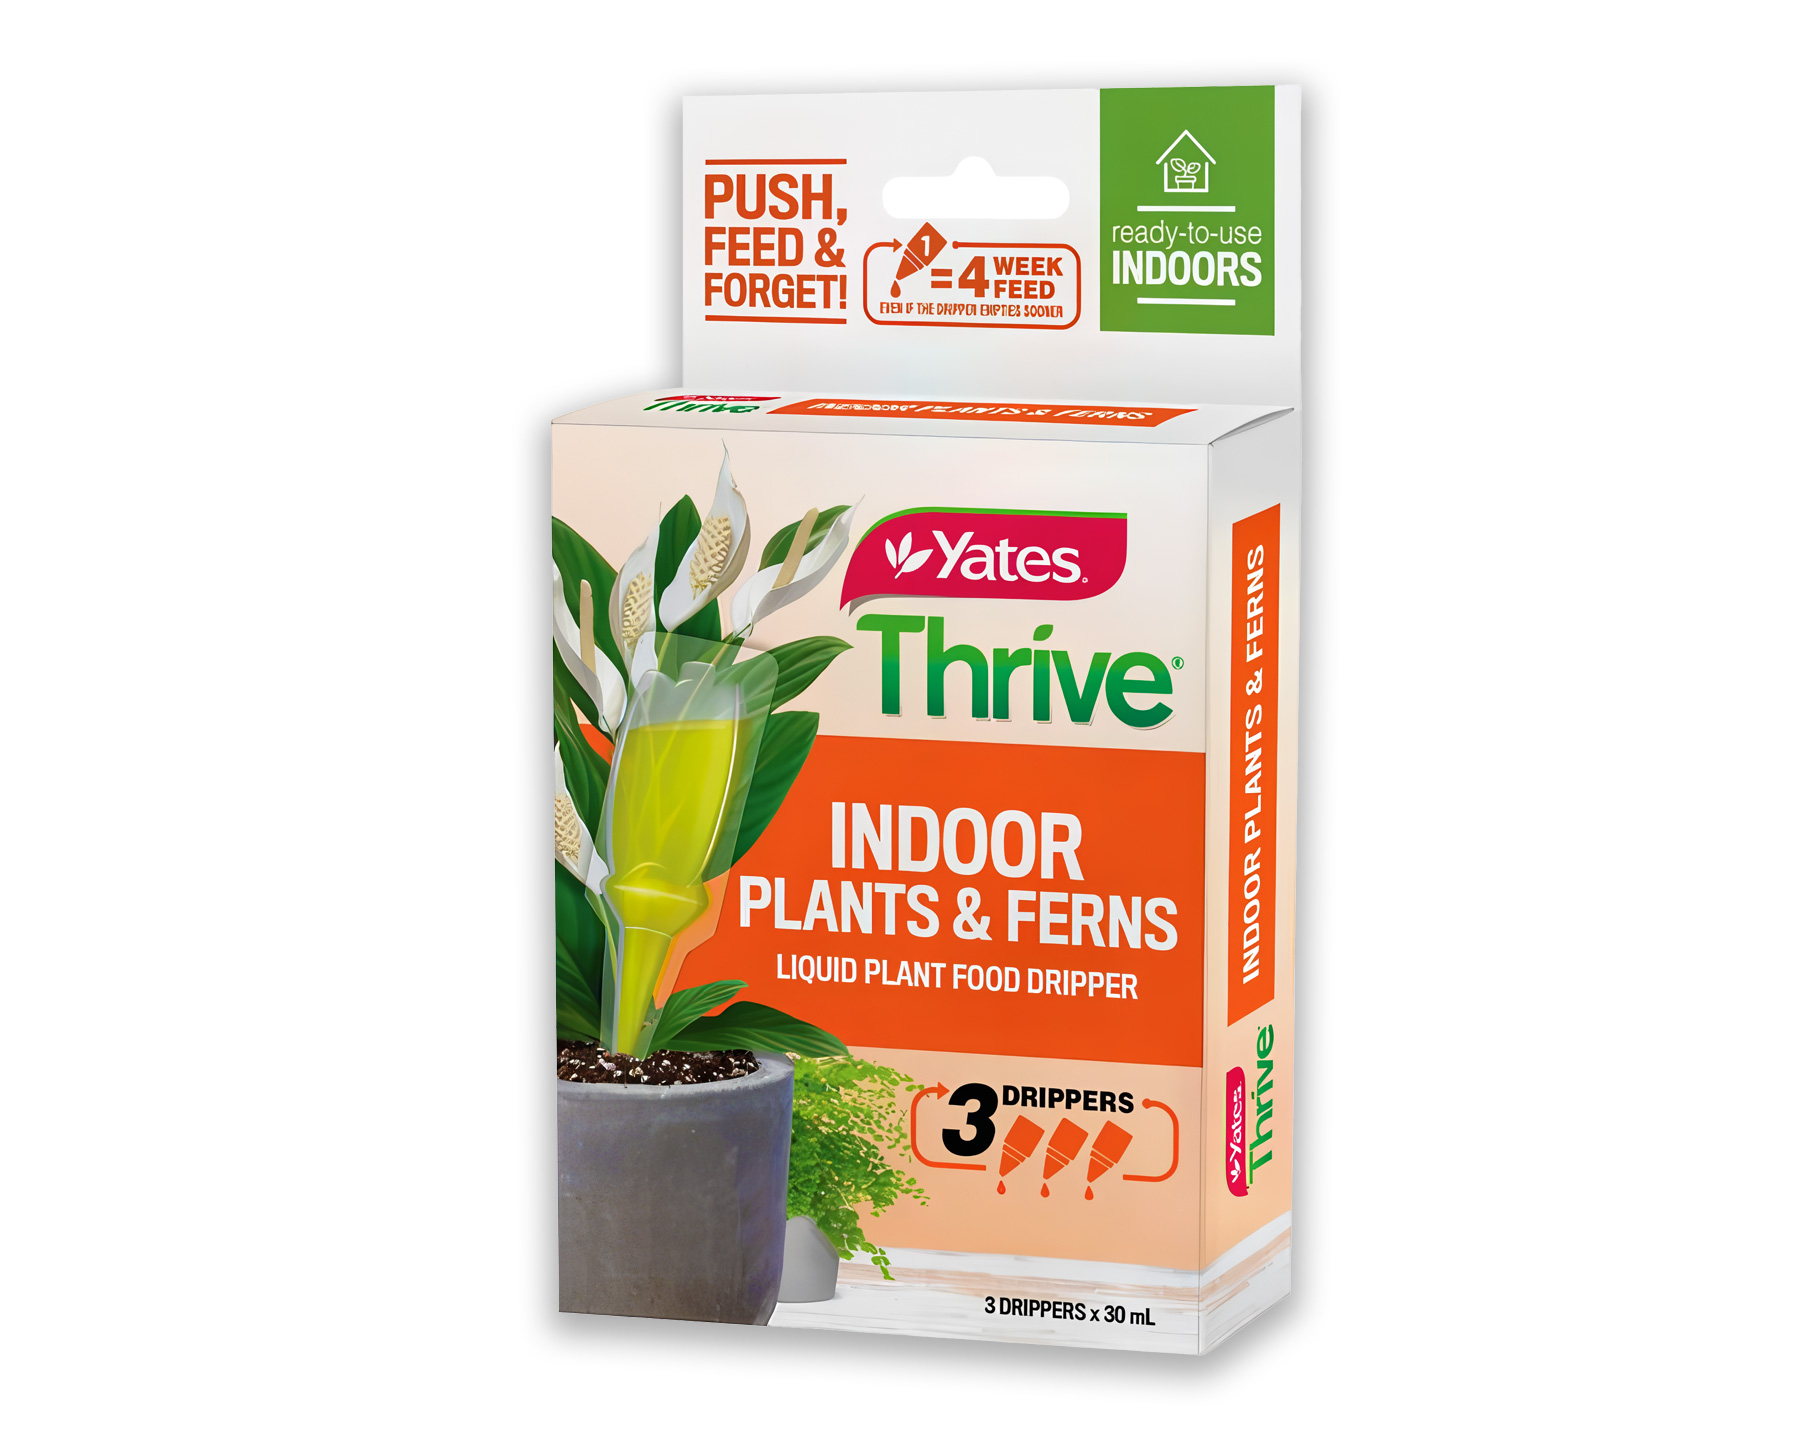 Thrive Indoor Plant Food Dripper pack